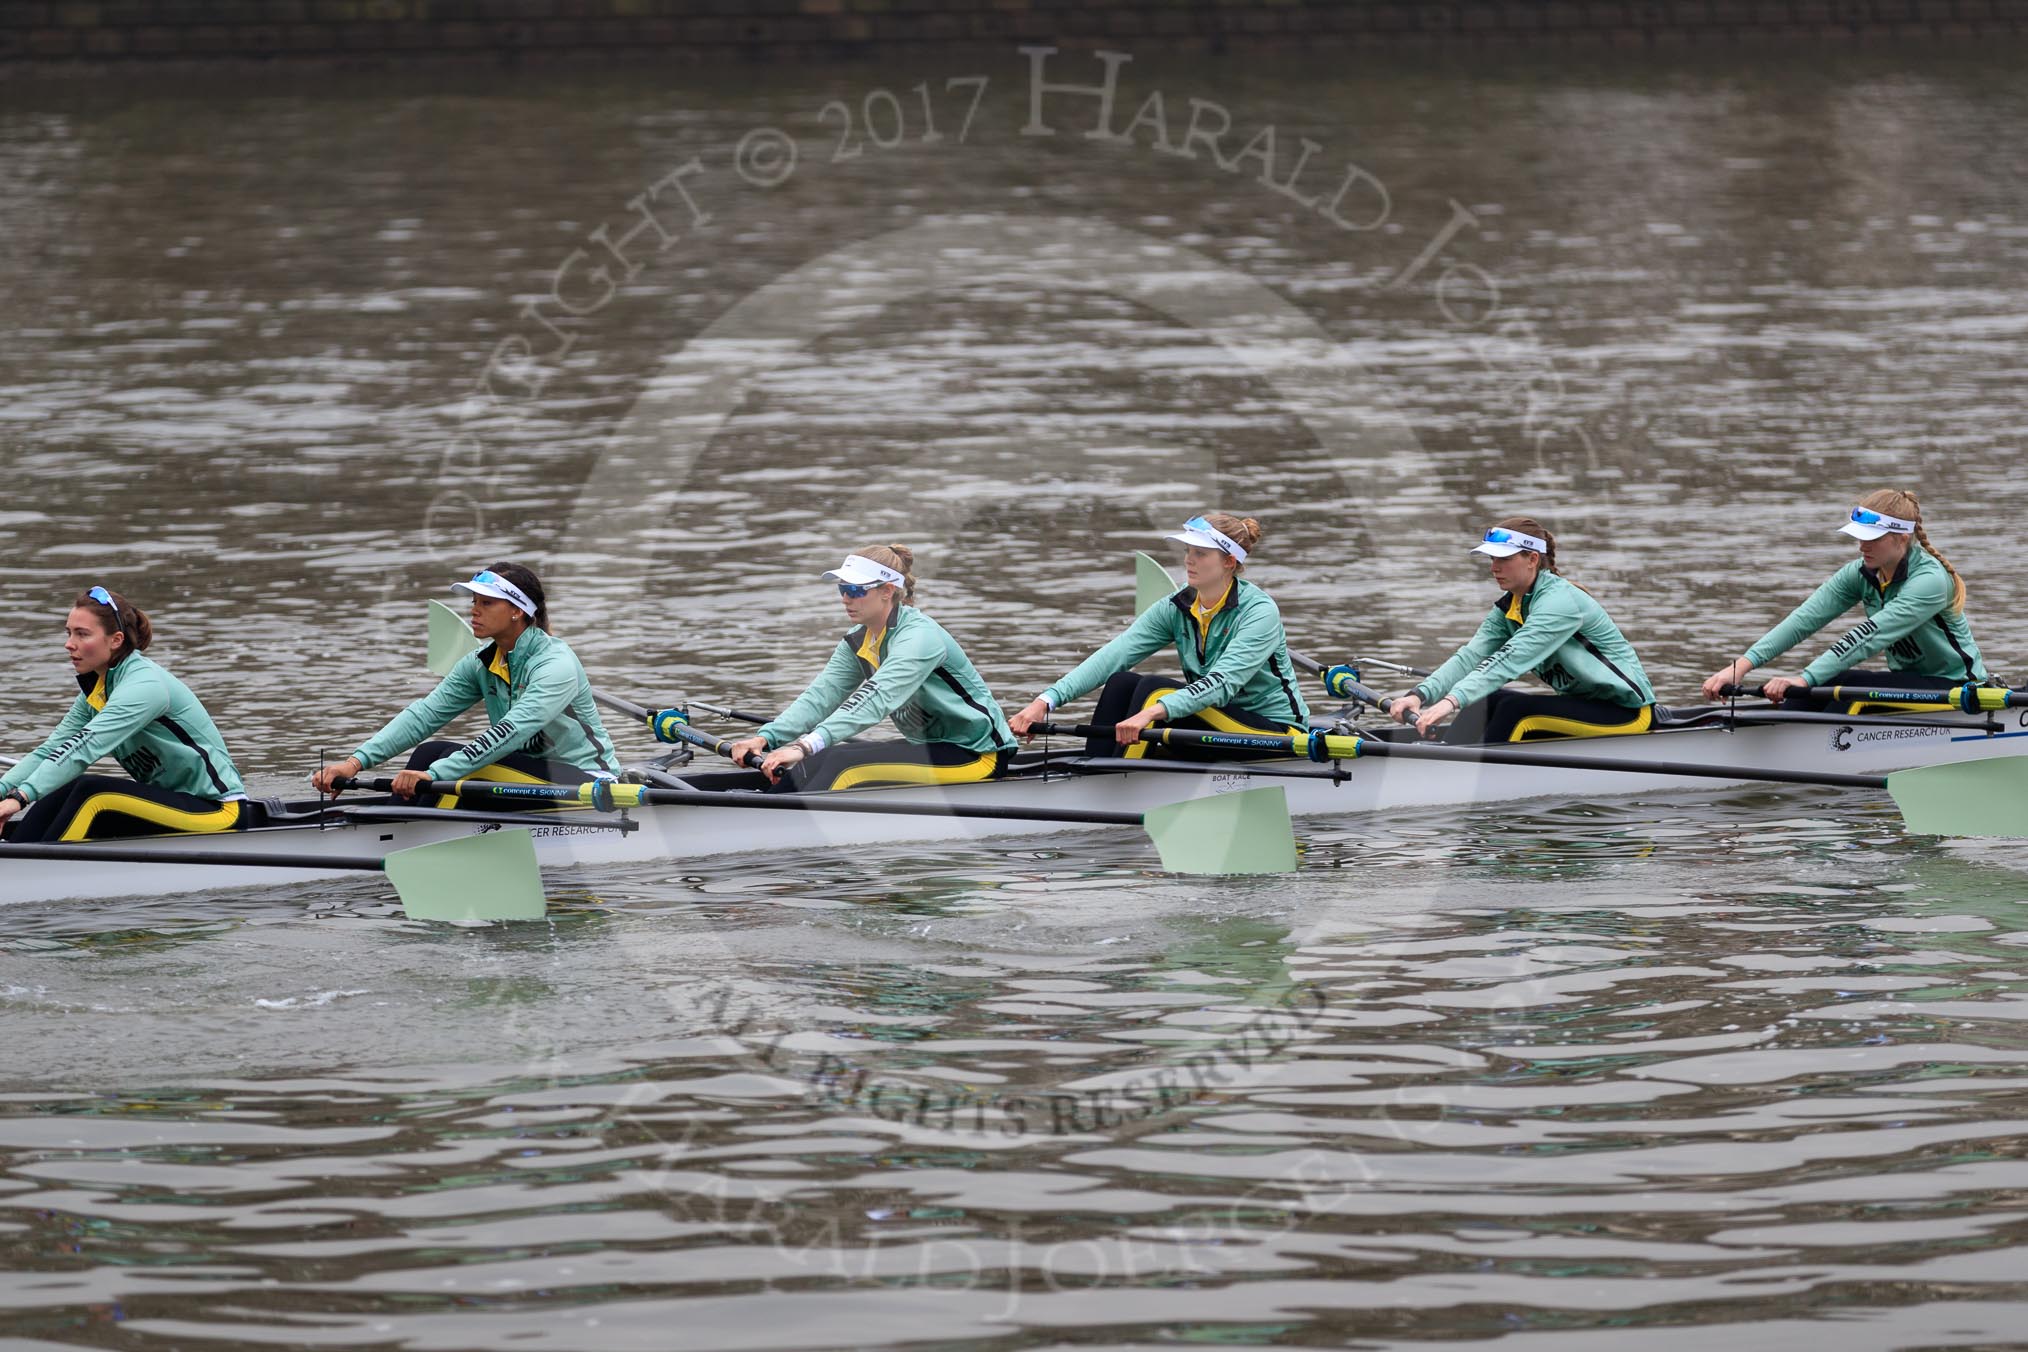 The Cancer Research UK Women's Boat Race 2018: The Cambridge reserve boat Blondie, here 6 seat Larkin Sayre, 5 Daphne Martschenko, 4 Laura Foster, 3 Anne Beenken, 2 Emma Andrews, and bow Pippa Dakin.
River Thames between Putney Bridge and Mortlake,
London SW15,

United Kingdom,
on 24 March 2018 at 16:03, image #139